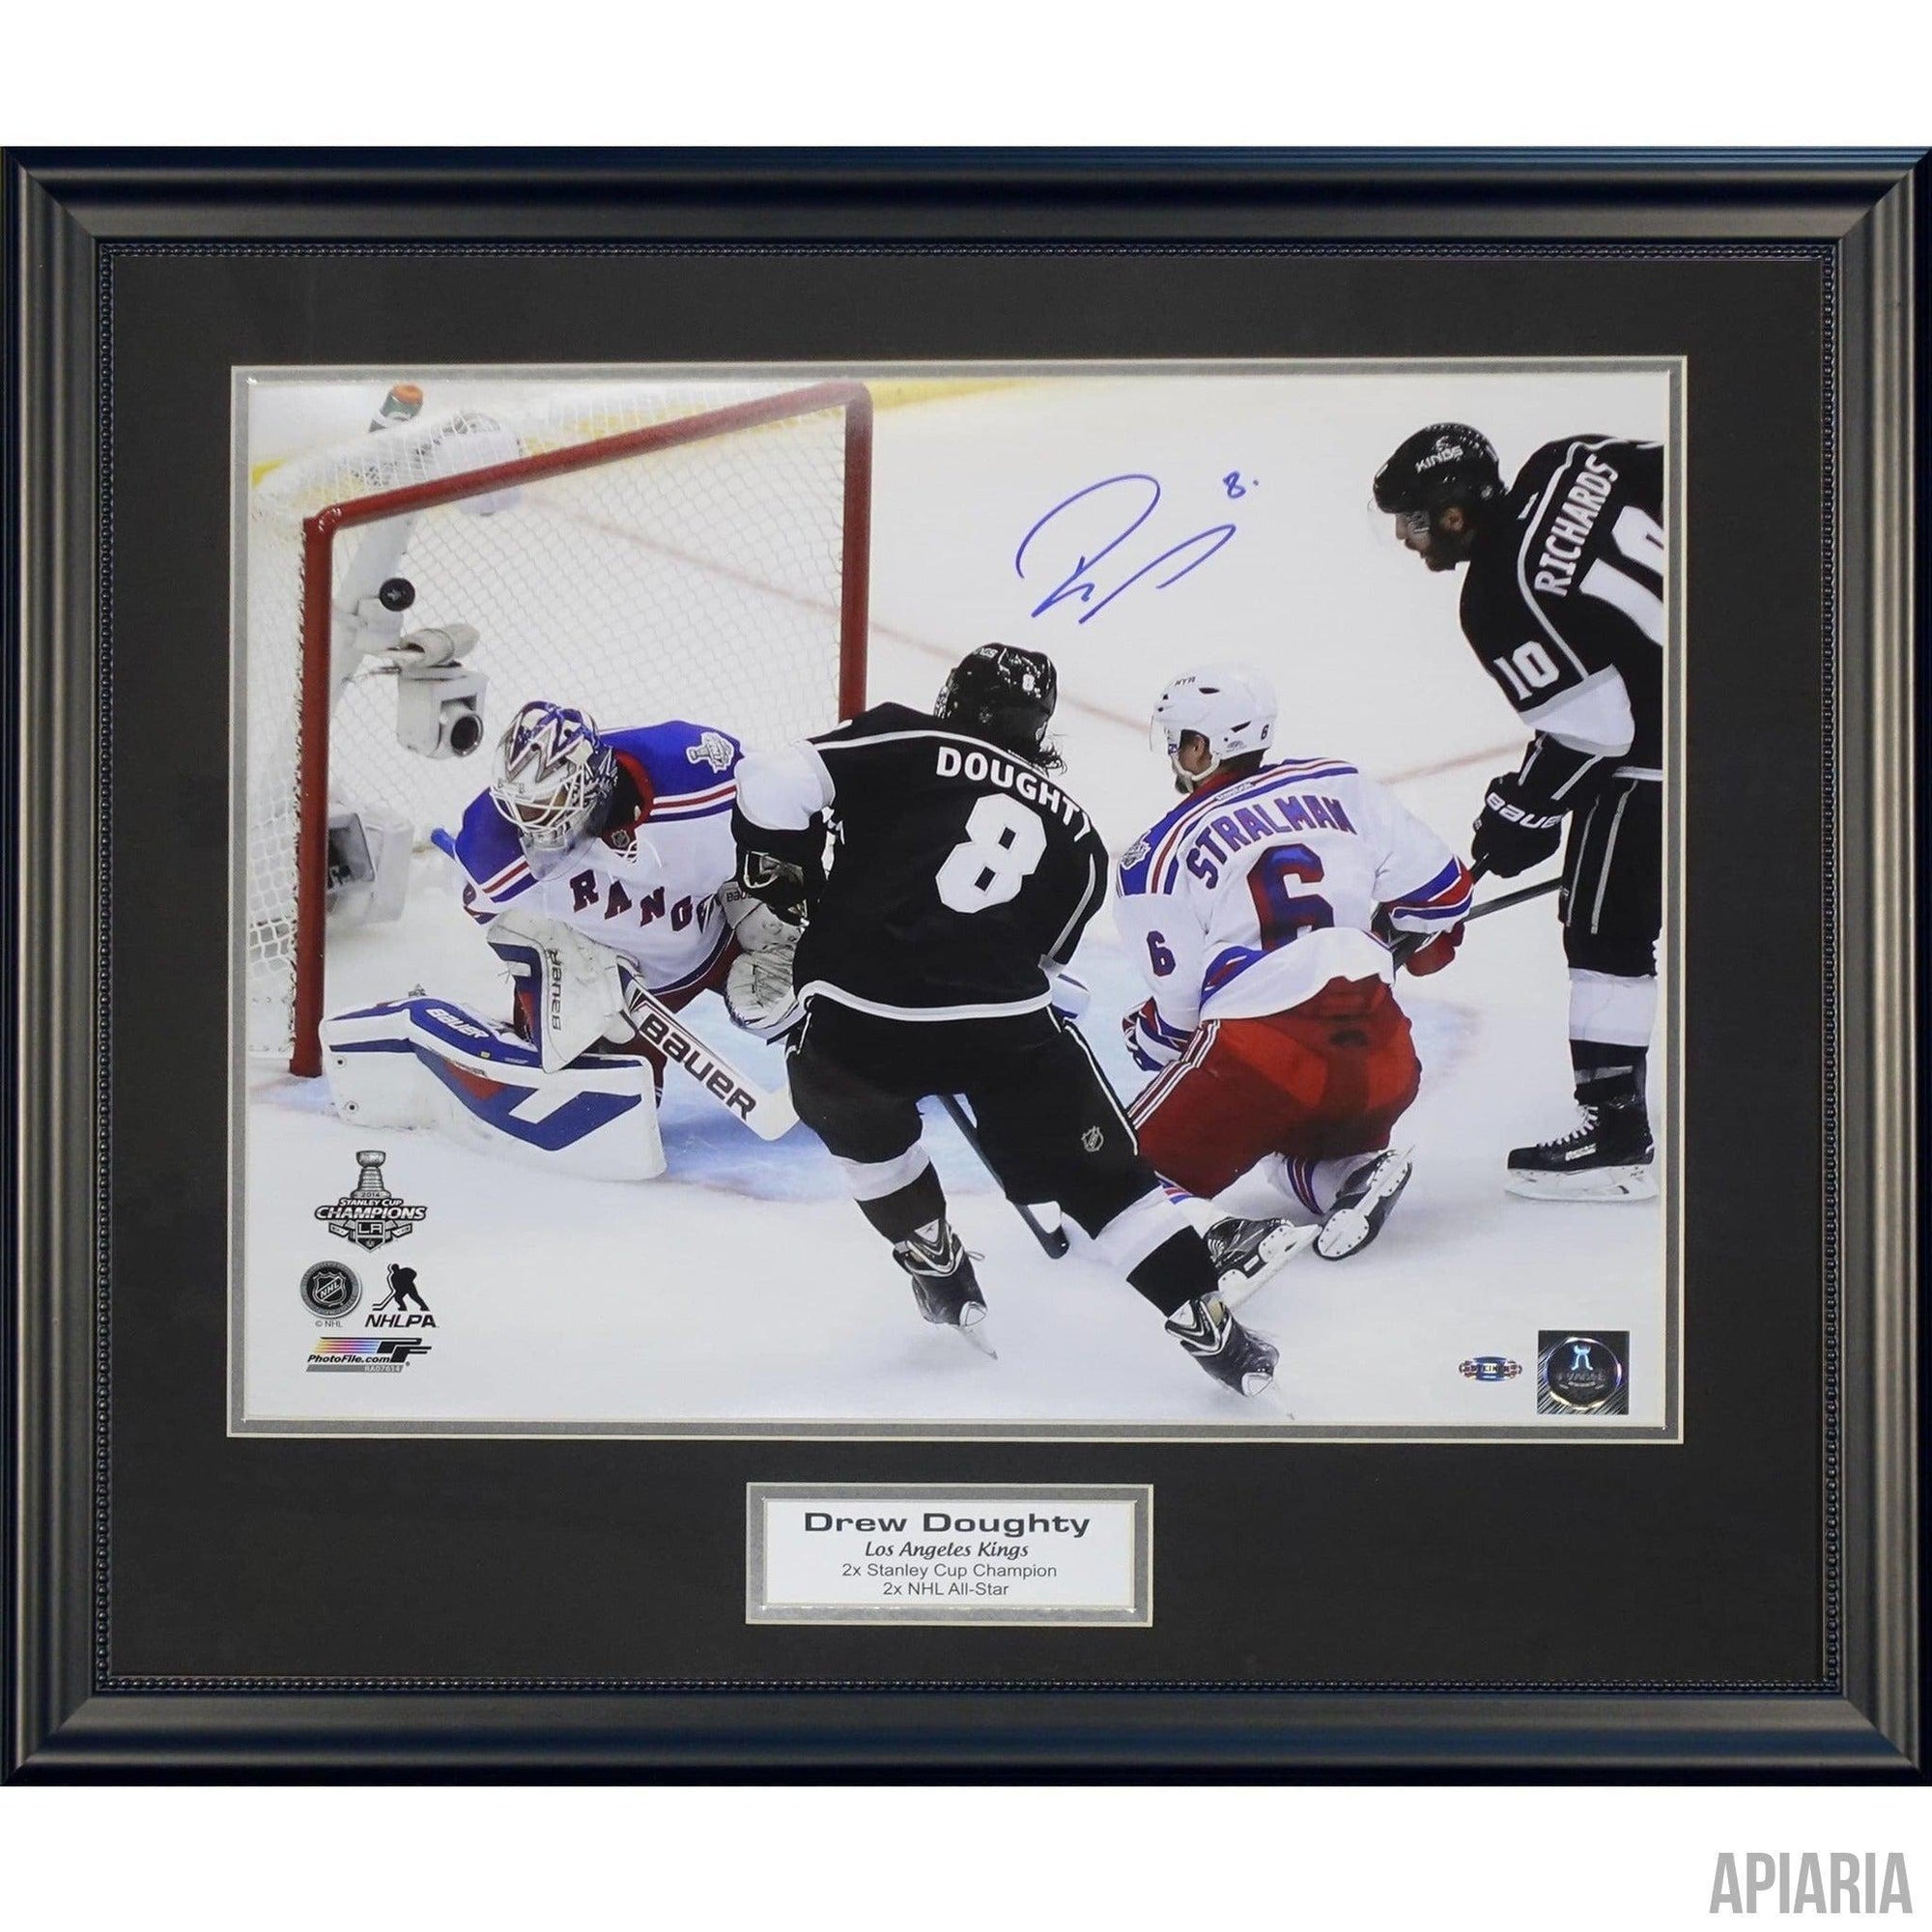 Drew Doughty "Stanley Cup Goal" Autographed Photo-Framed Item-Apiaria